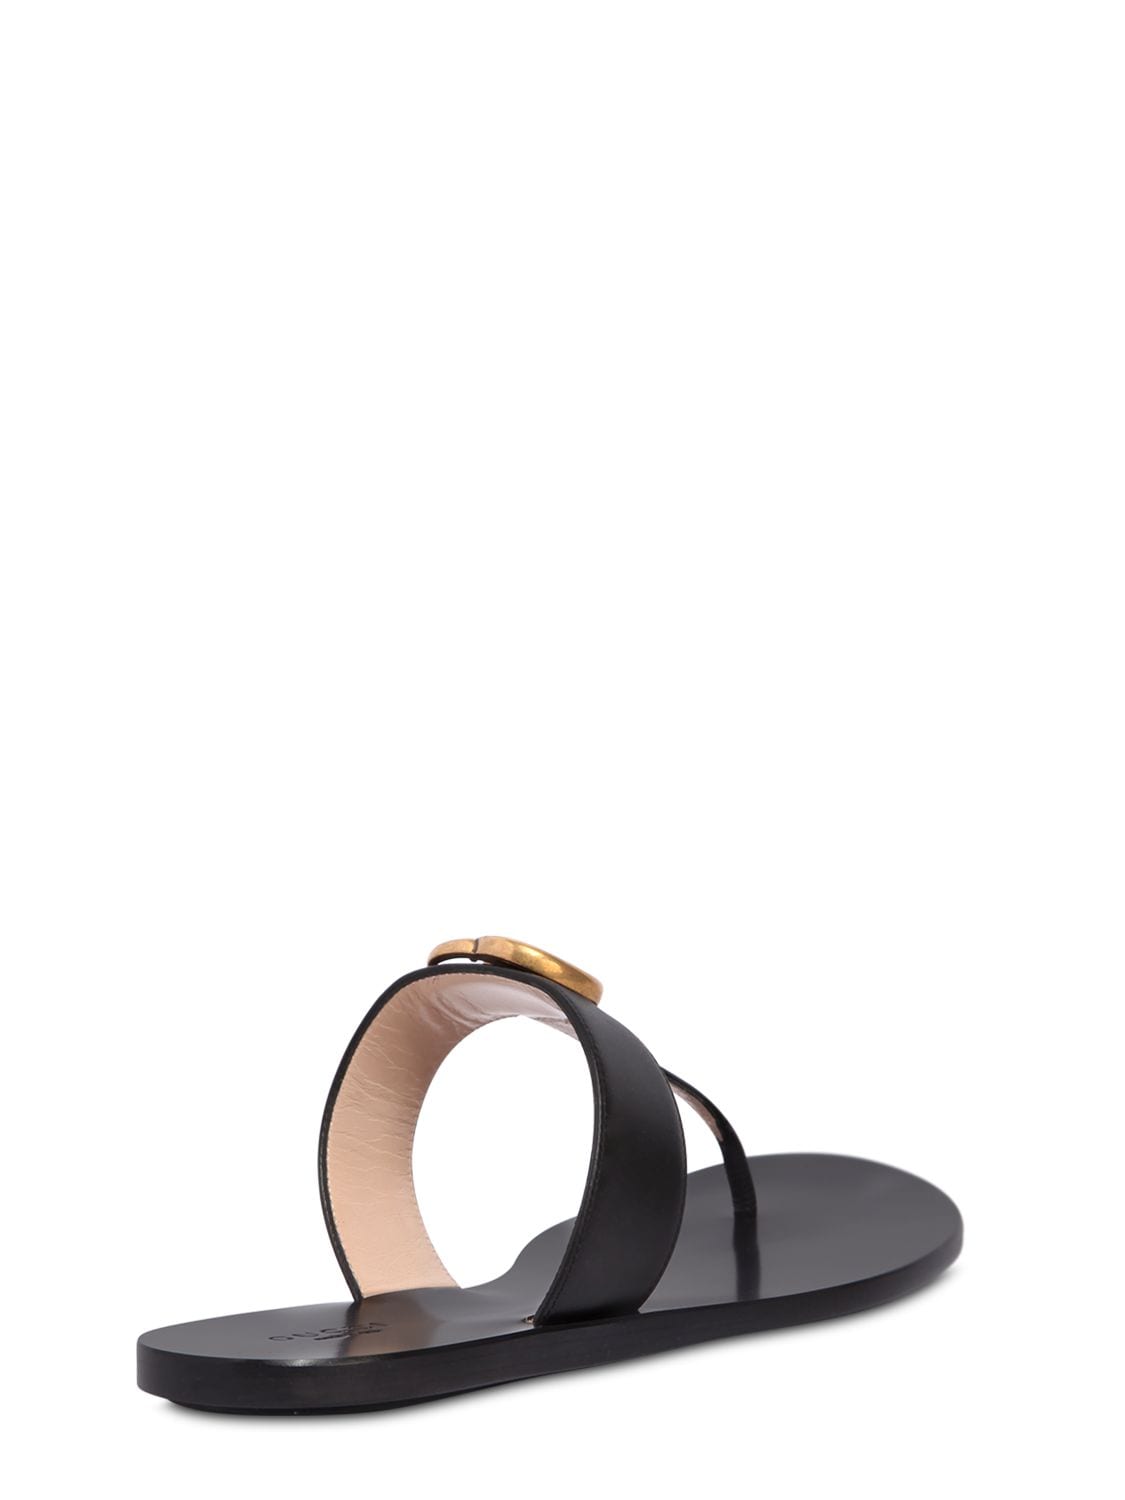 GUCCI 10MM MARMONT LEATHER THONG SANDALS 71IMU9033-MTAWMA2